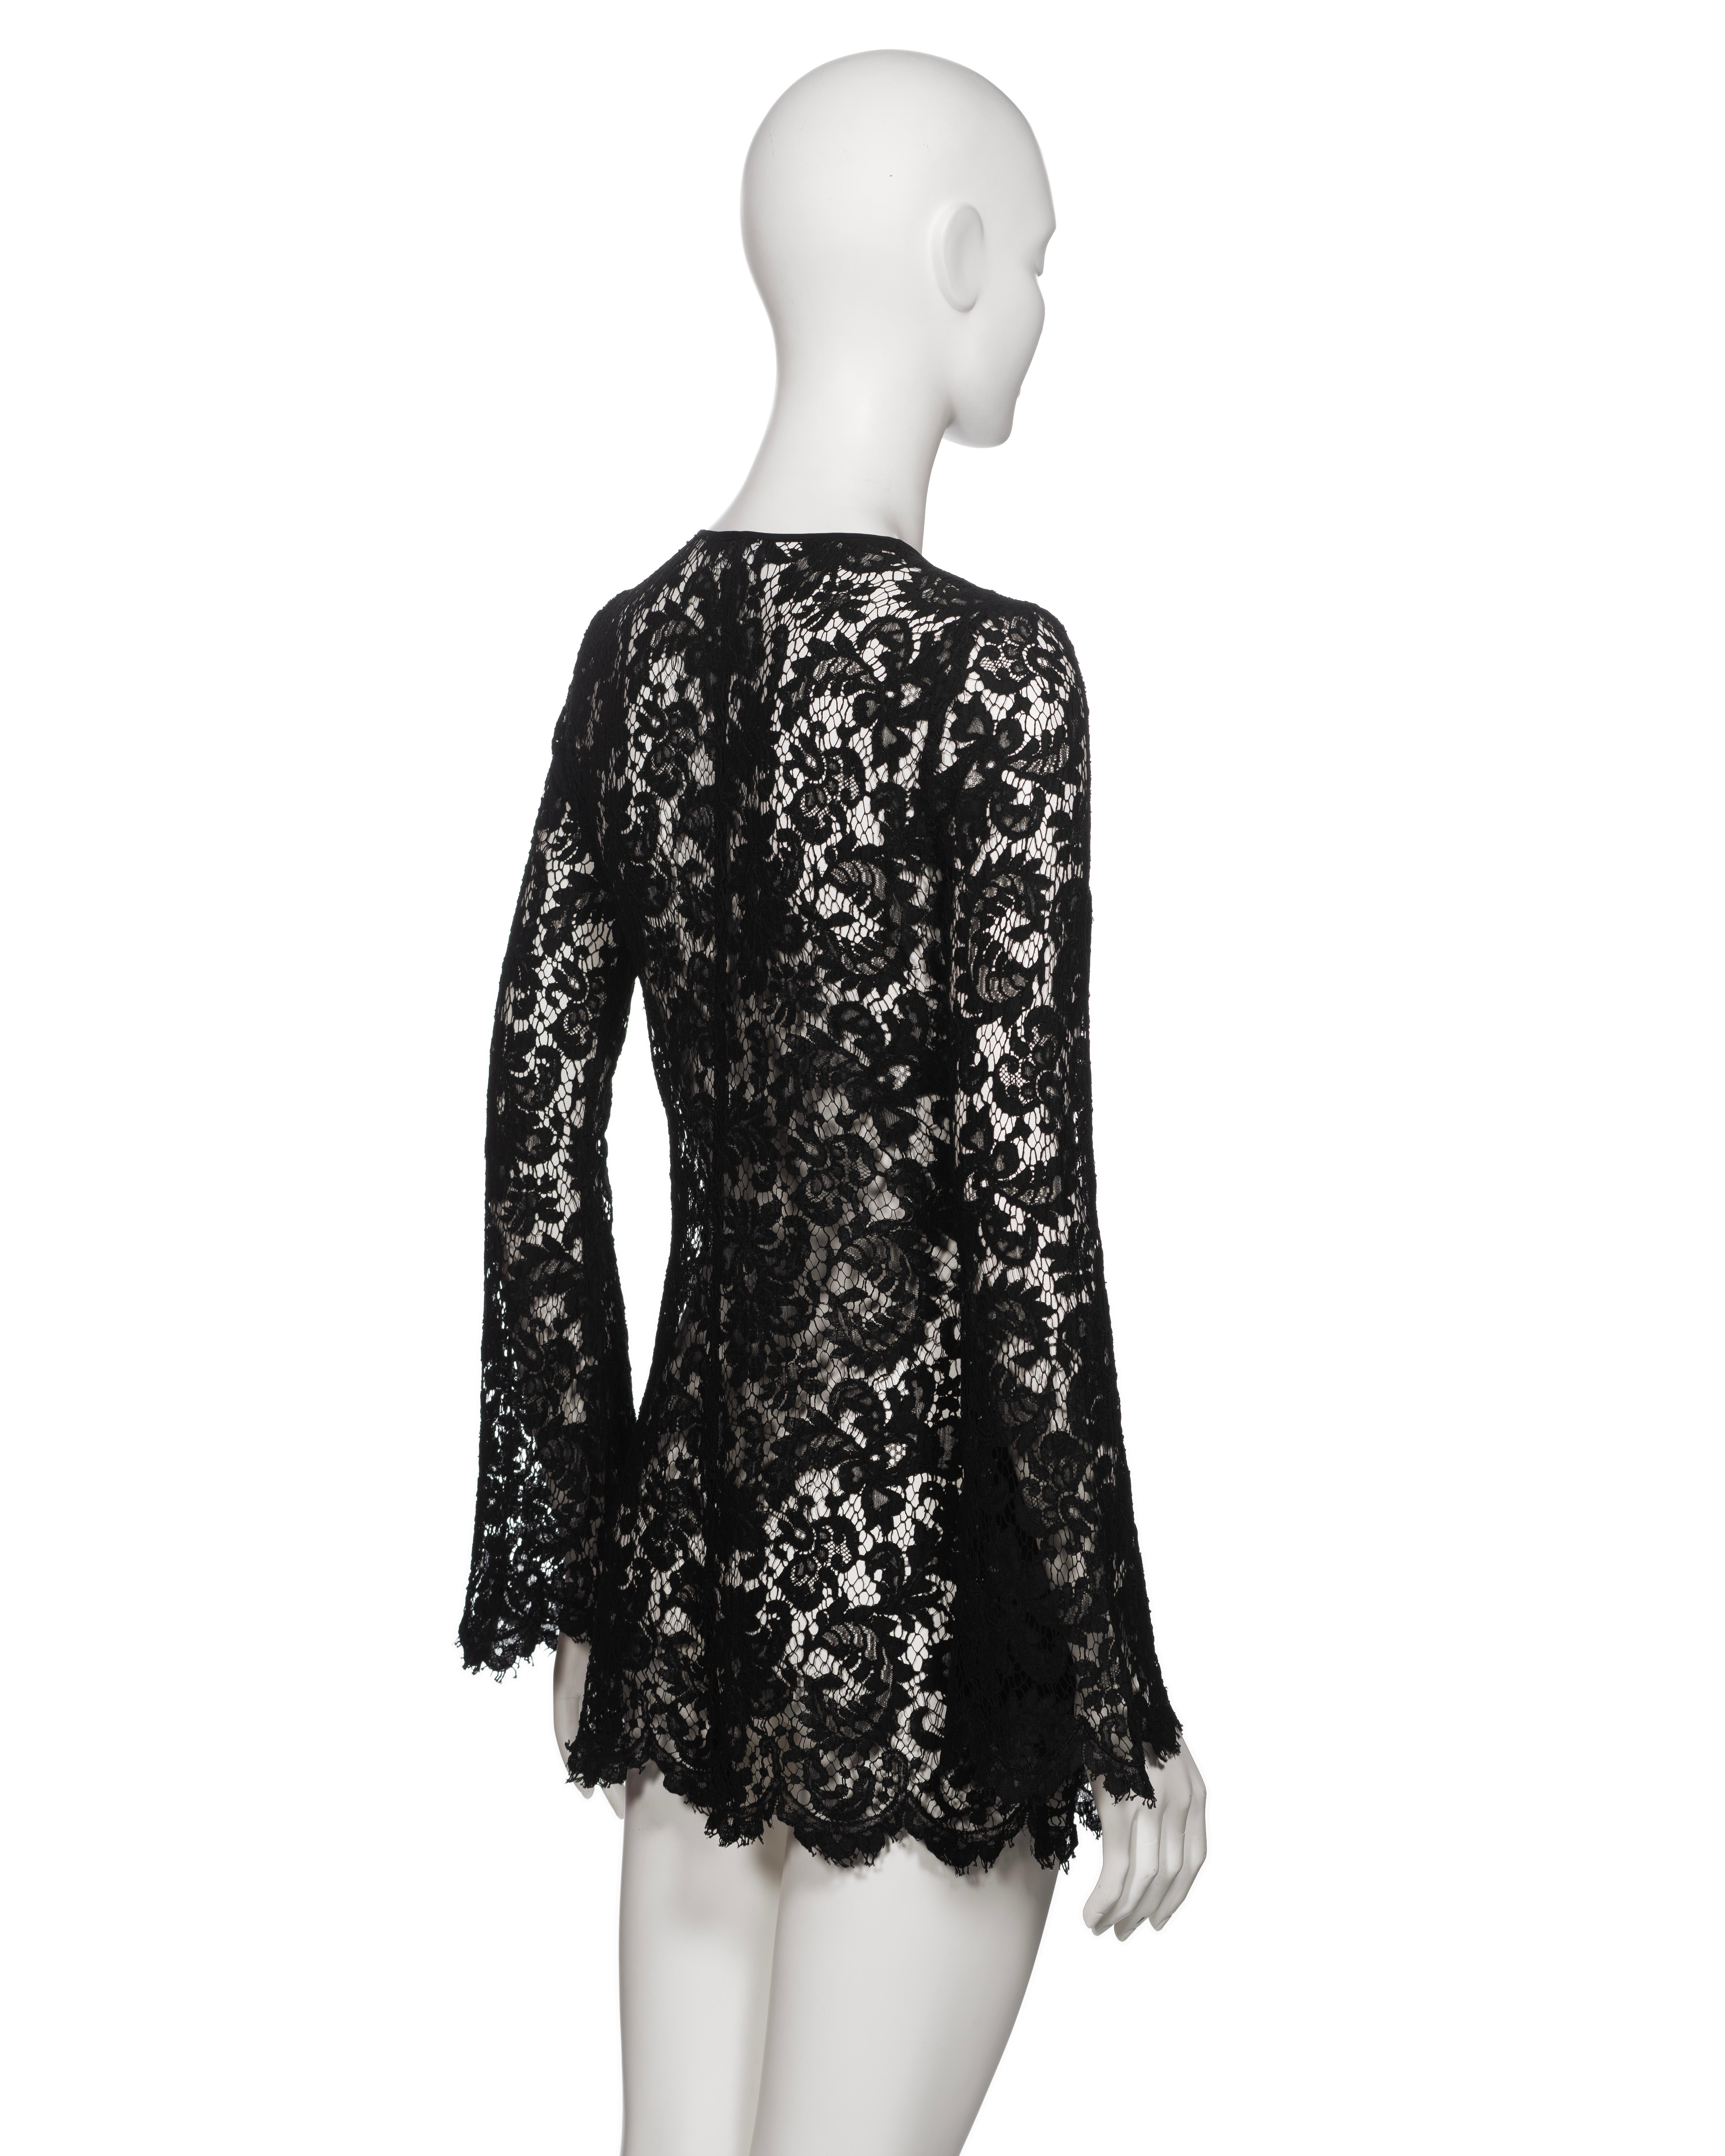 Gucci by Tom Ford Black Lace Long Sleeve Micro Mini Dress, SS 1996 For Sale 4